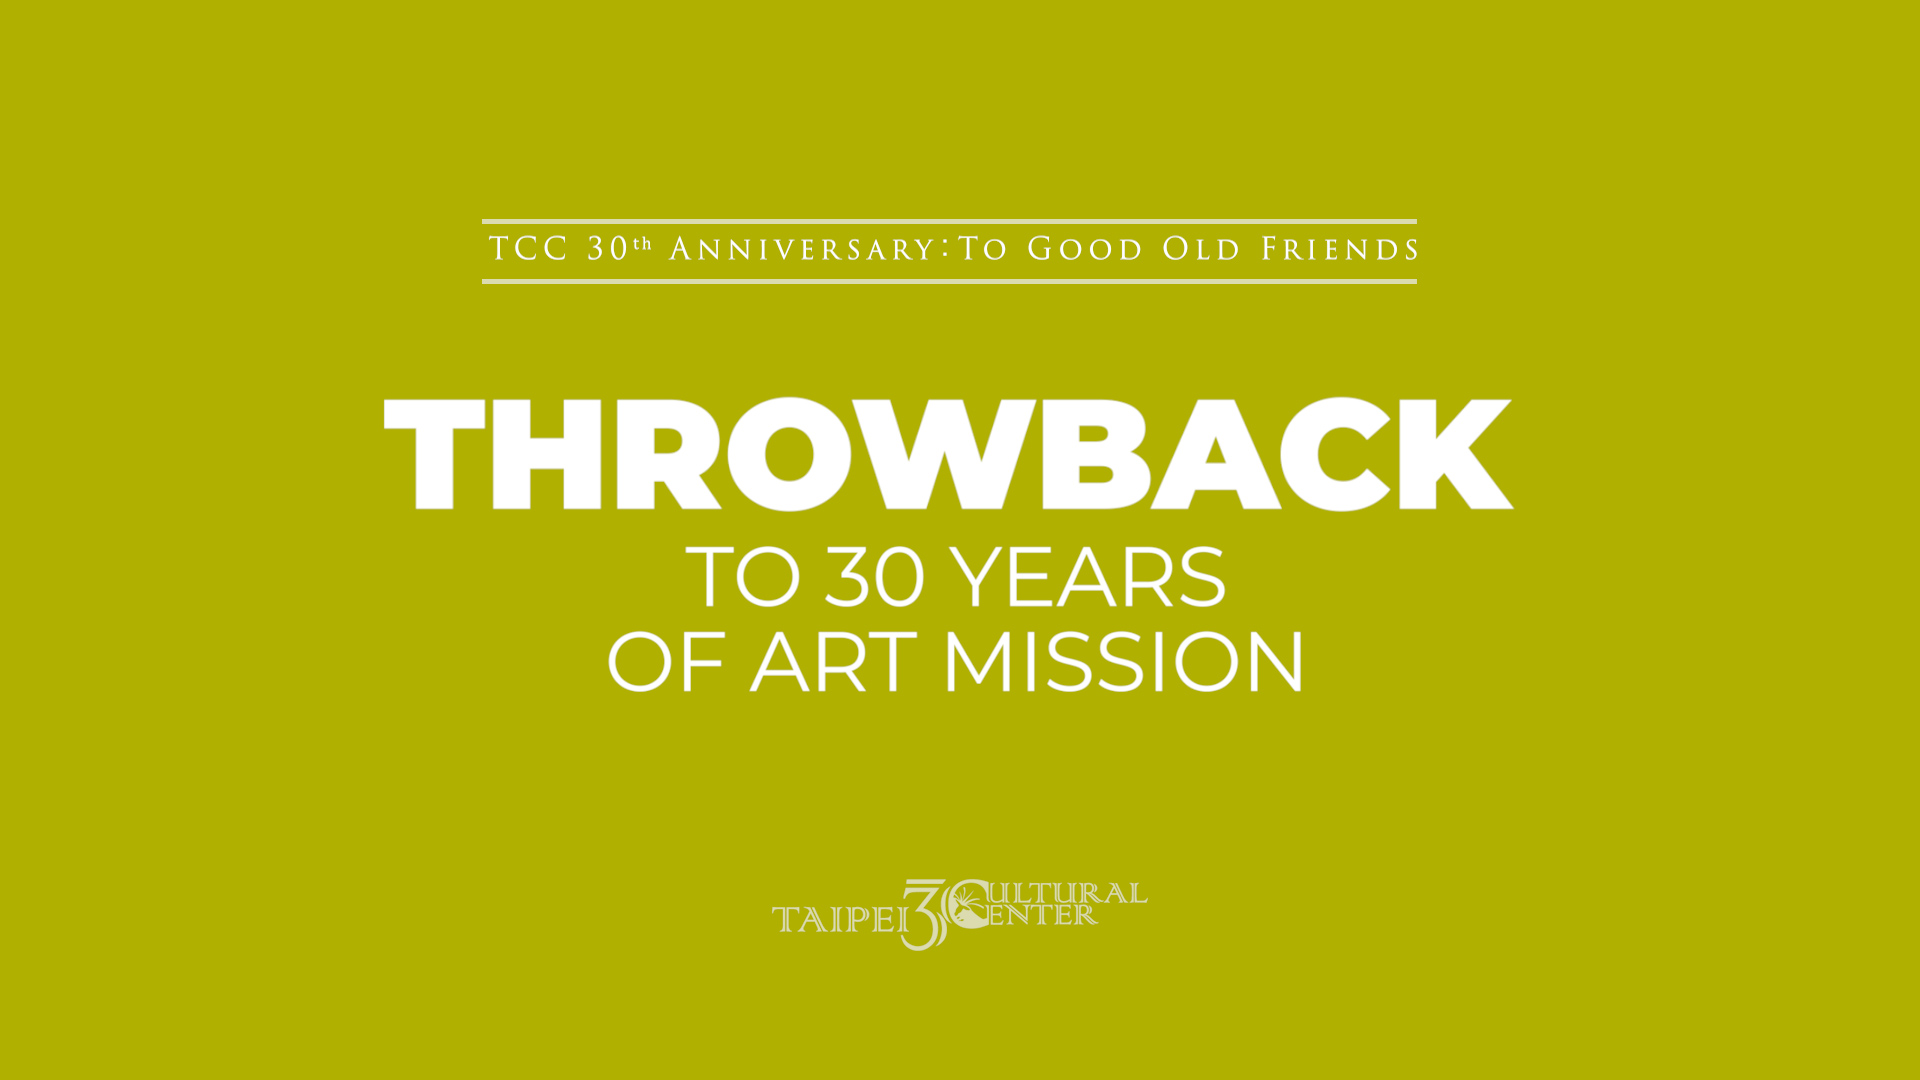 Throw Back to 30 years Art Mission